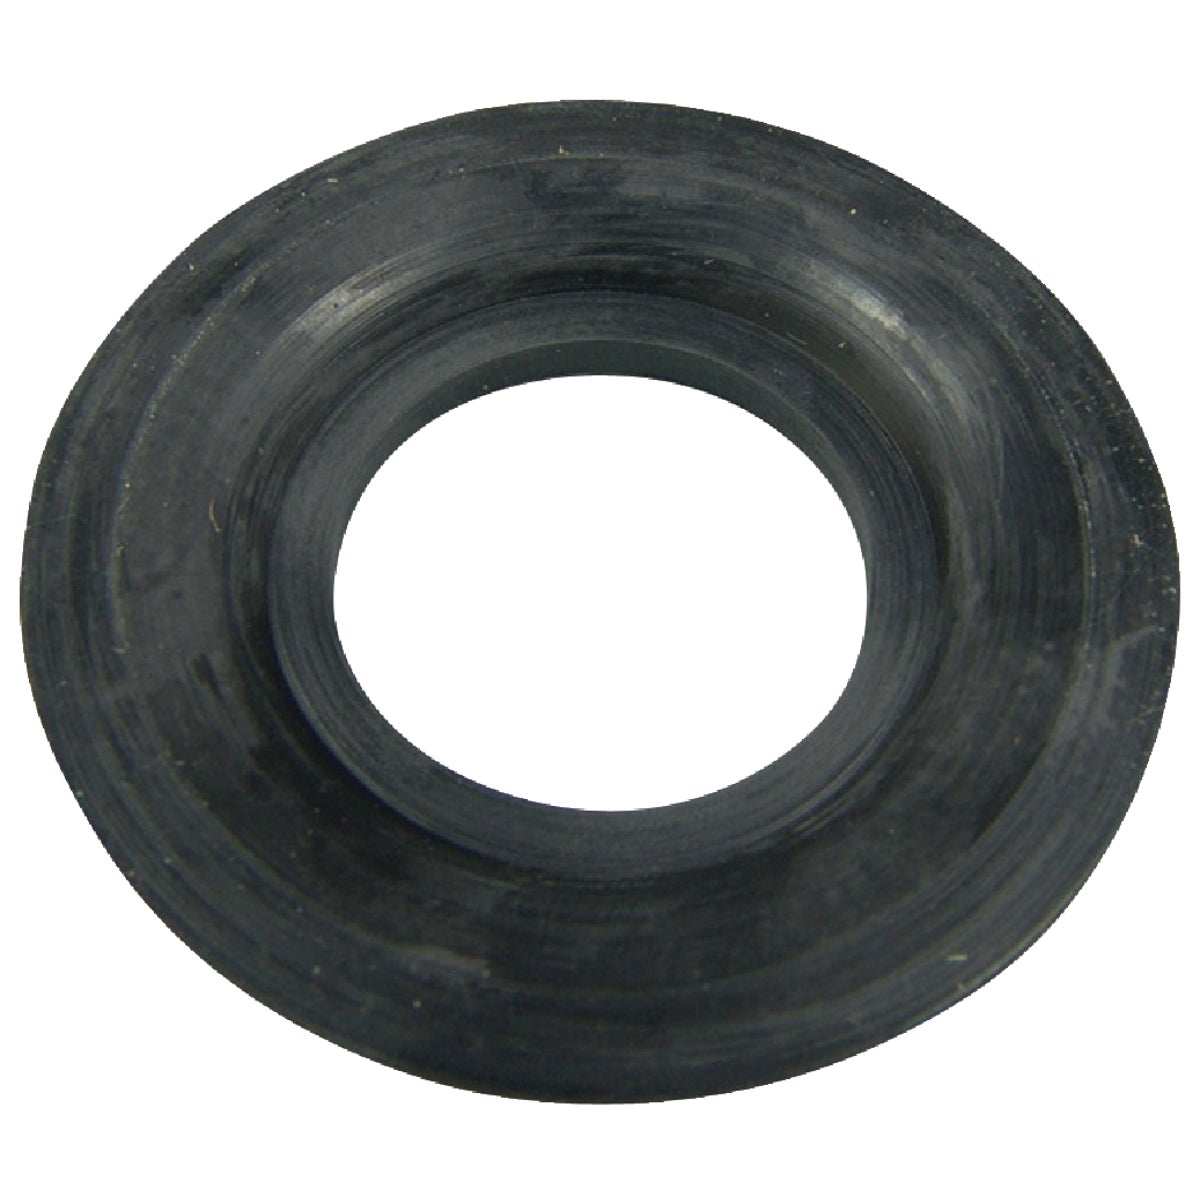 Item 455652, Gasket fits most tip toe tub drain stoppers.